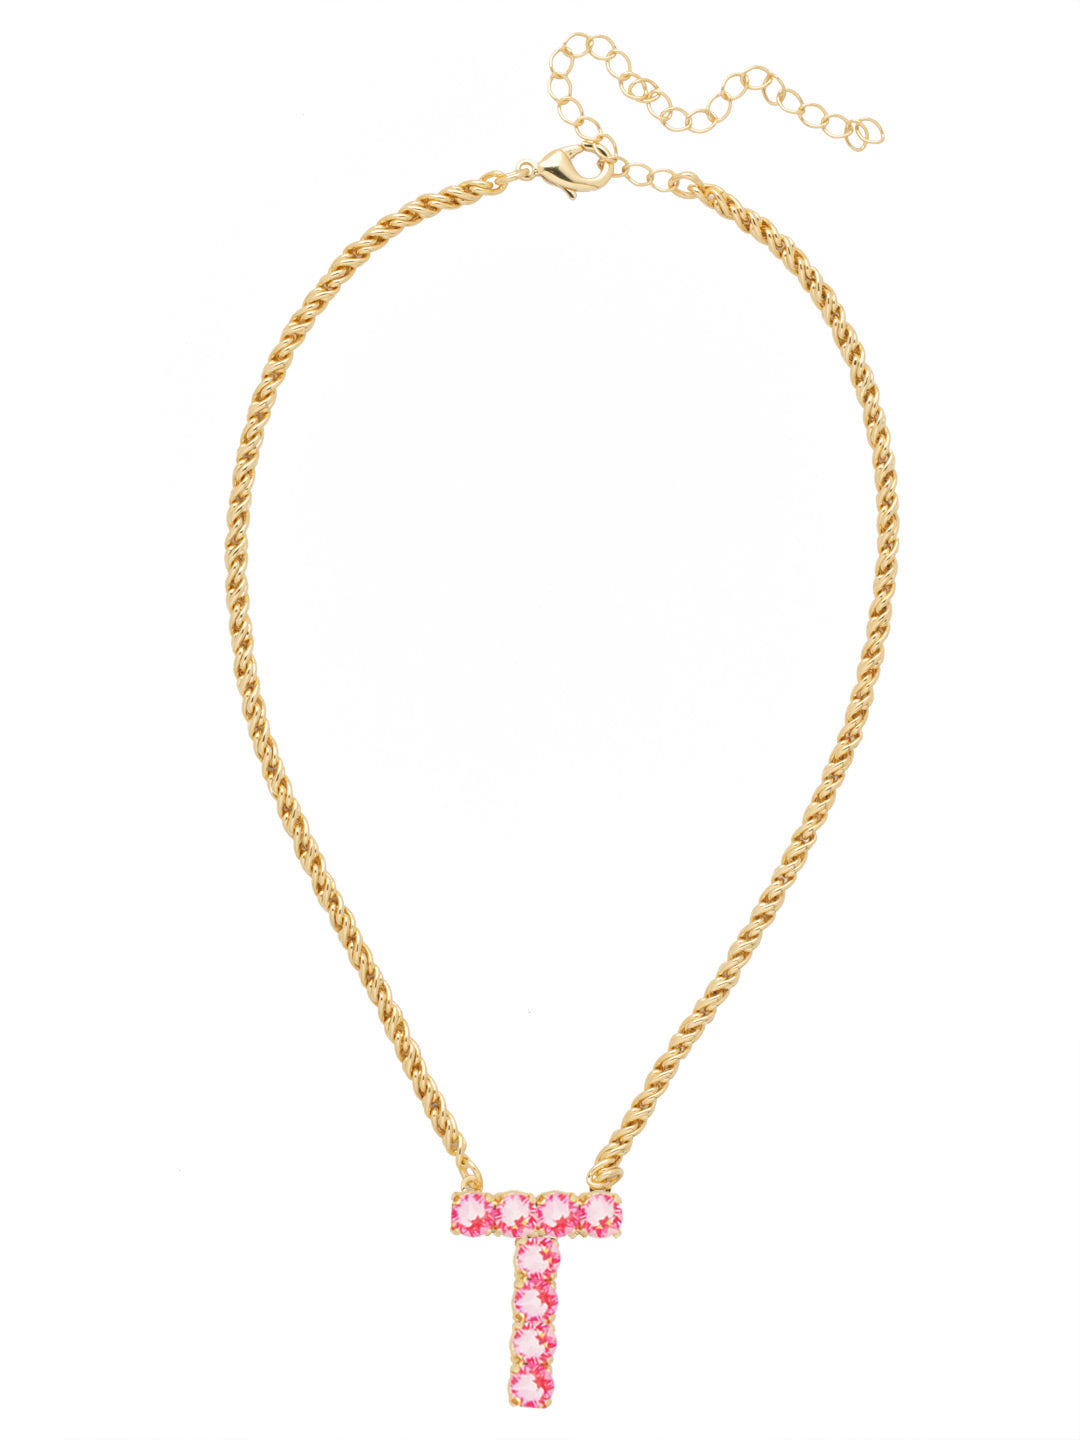 T Initial Rope Pendant Necklace - NFK39BGETP